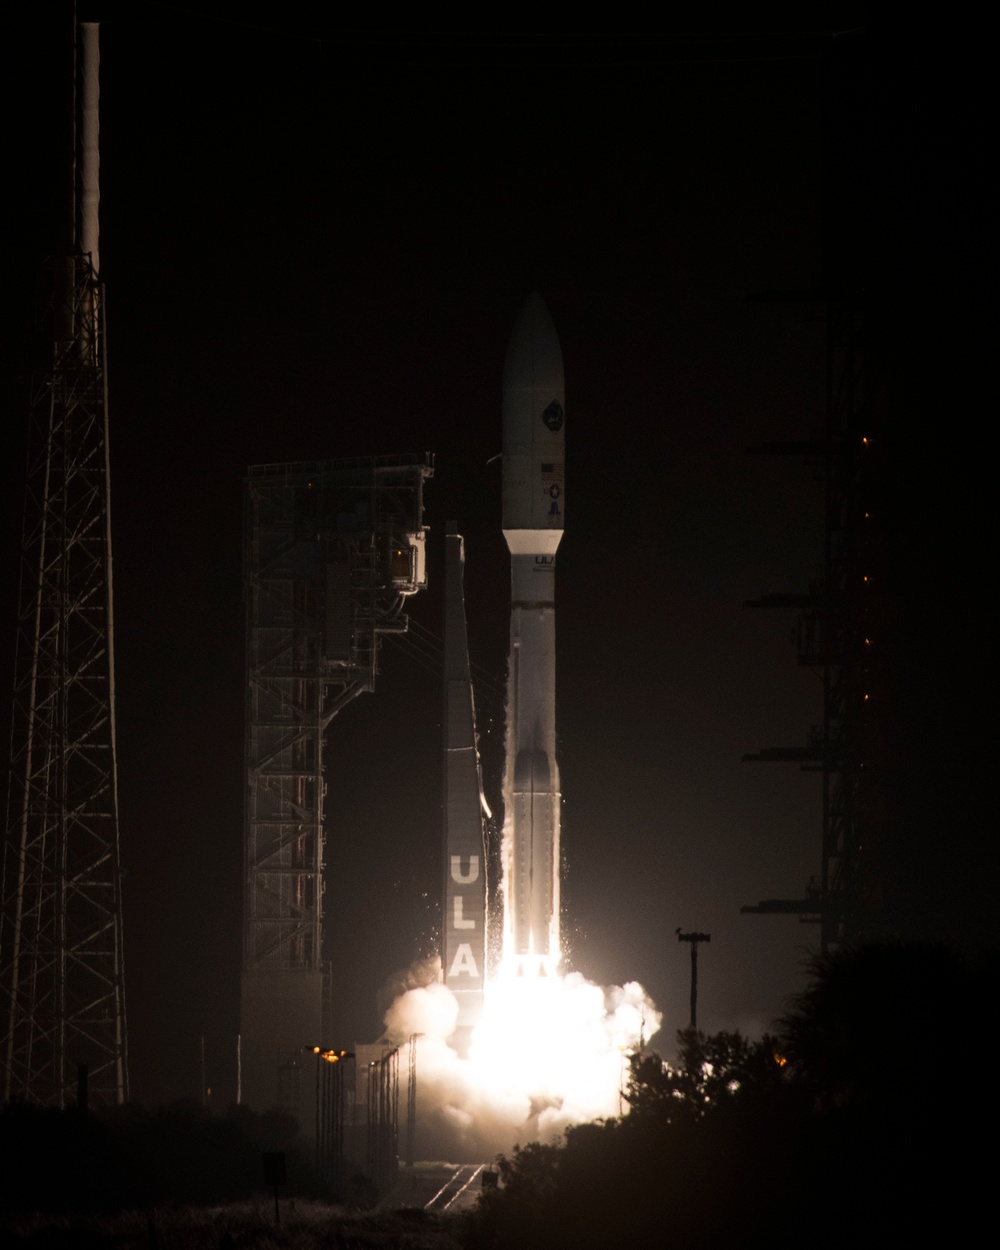 Atlas V AEHF-4 rocket successfully launches from Cape Canaveral Air Force Station